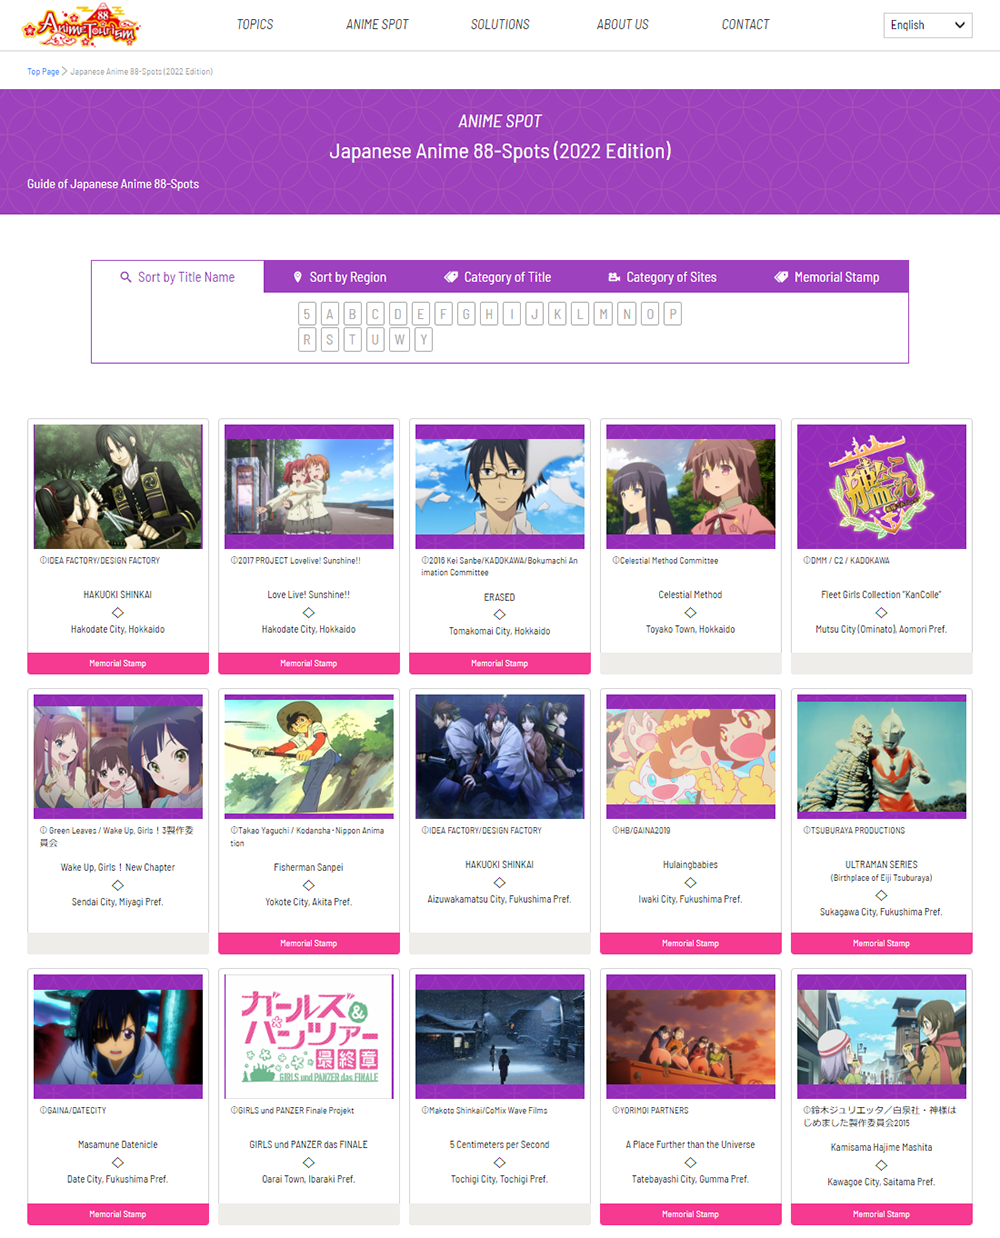 The Anime Tourism Association selects and releases the Japanese Anime 88-Spots on the association’s website every year.